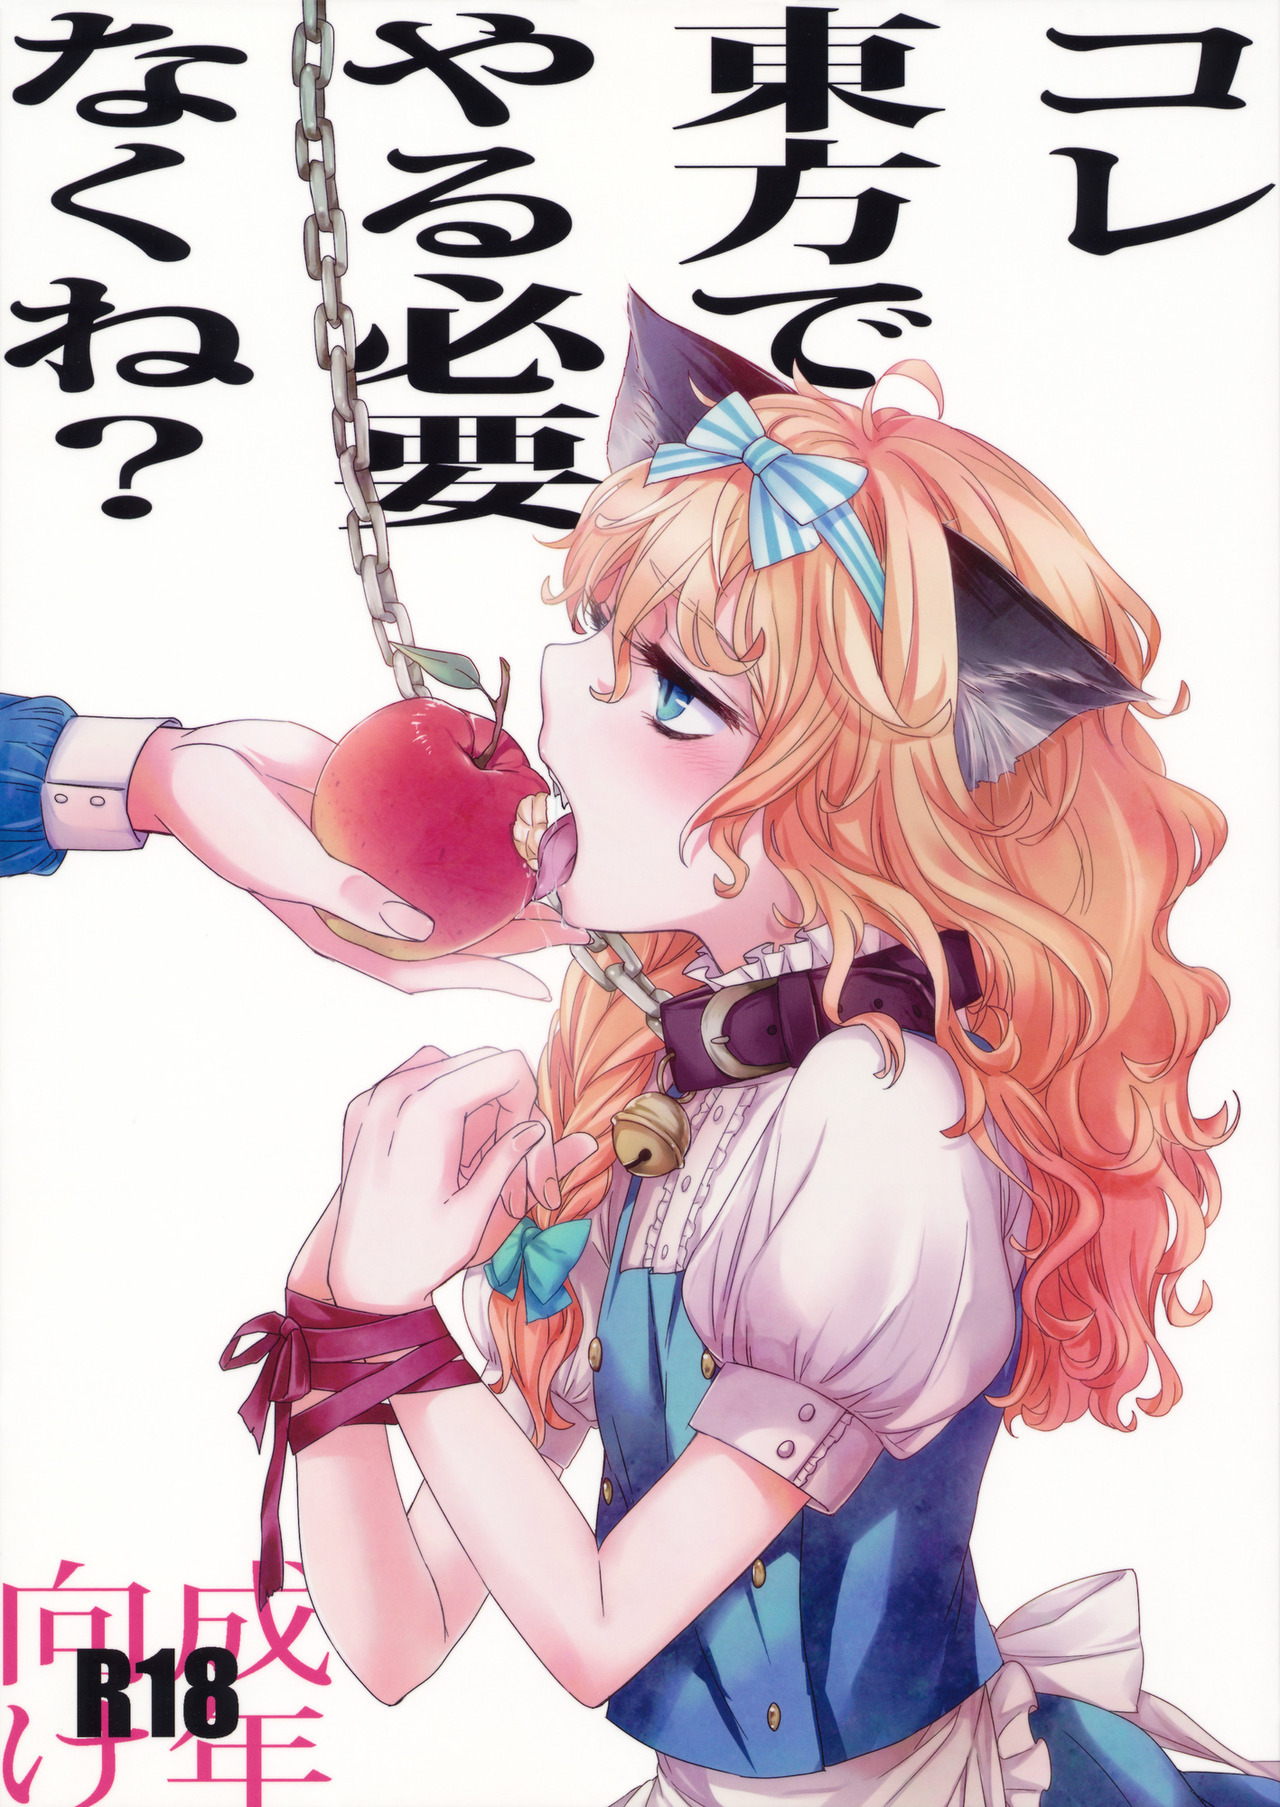 Is it really necessary to do this in Touhou by MATILDA A Touhou yuri doujin that